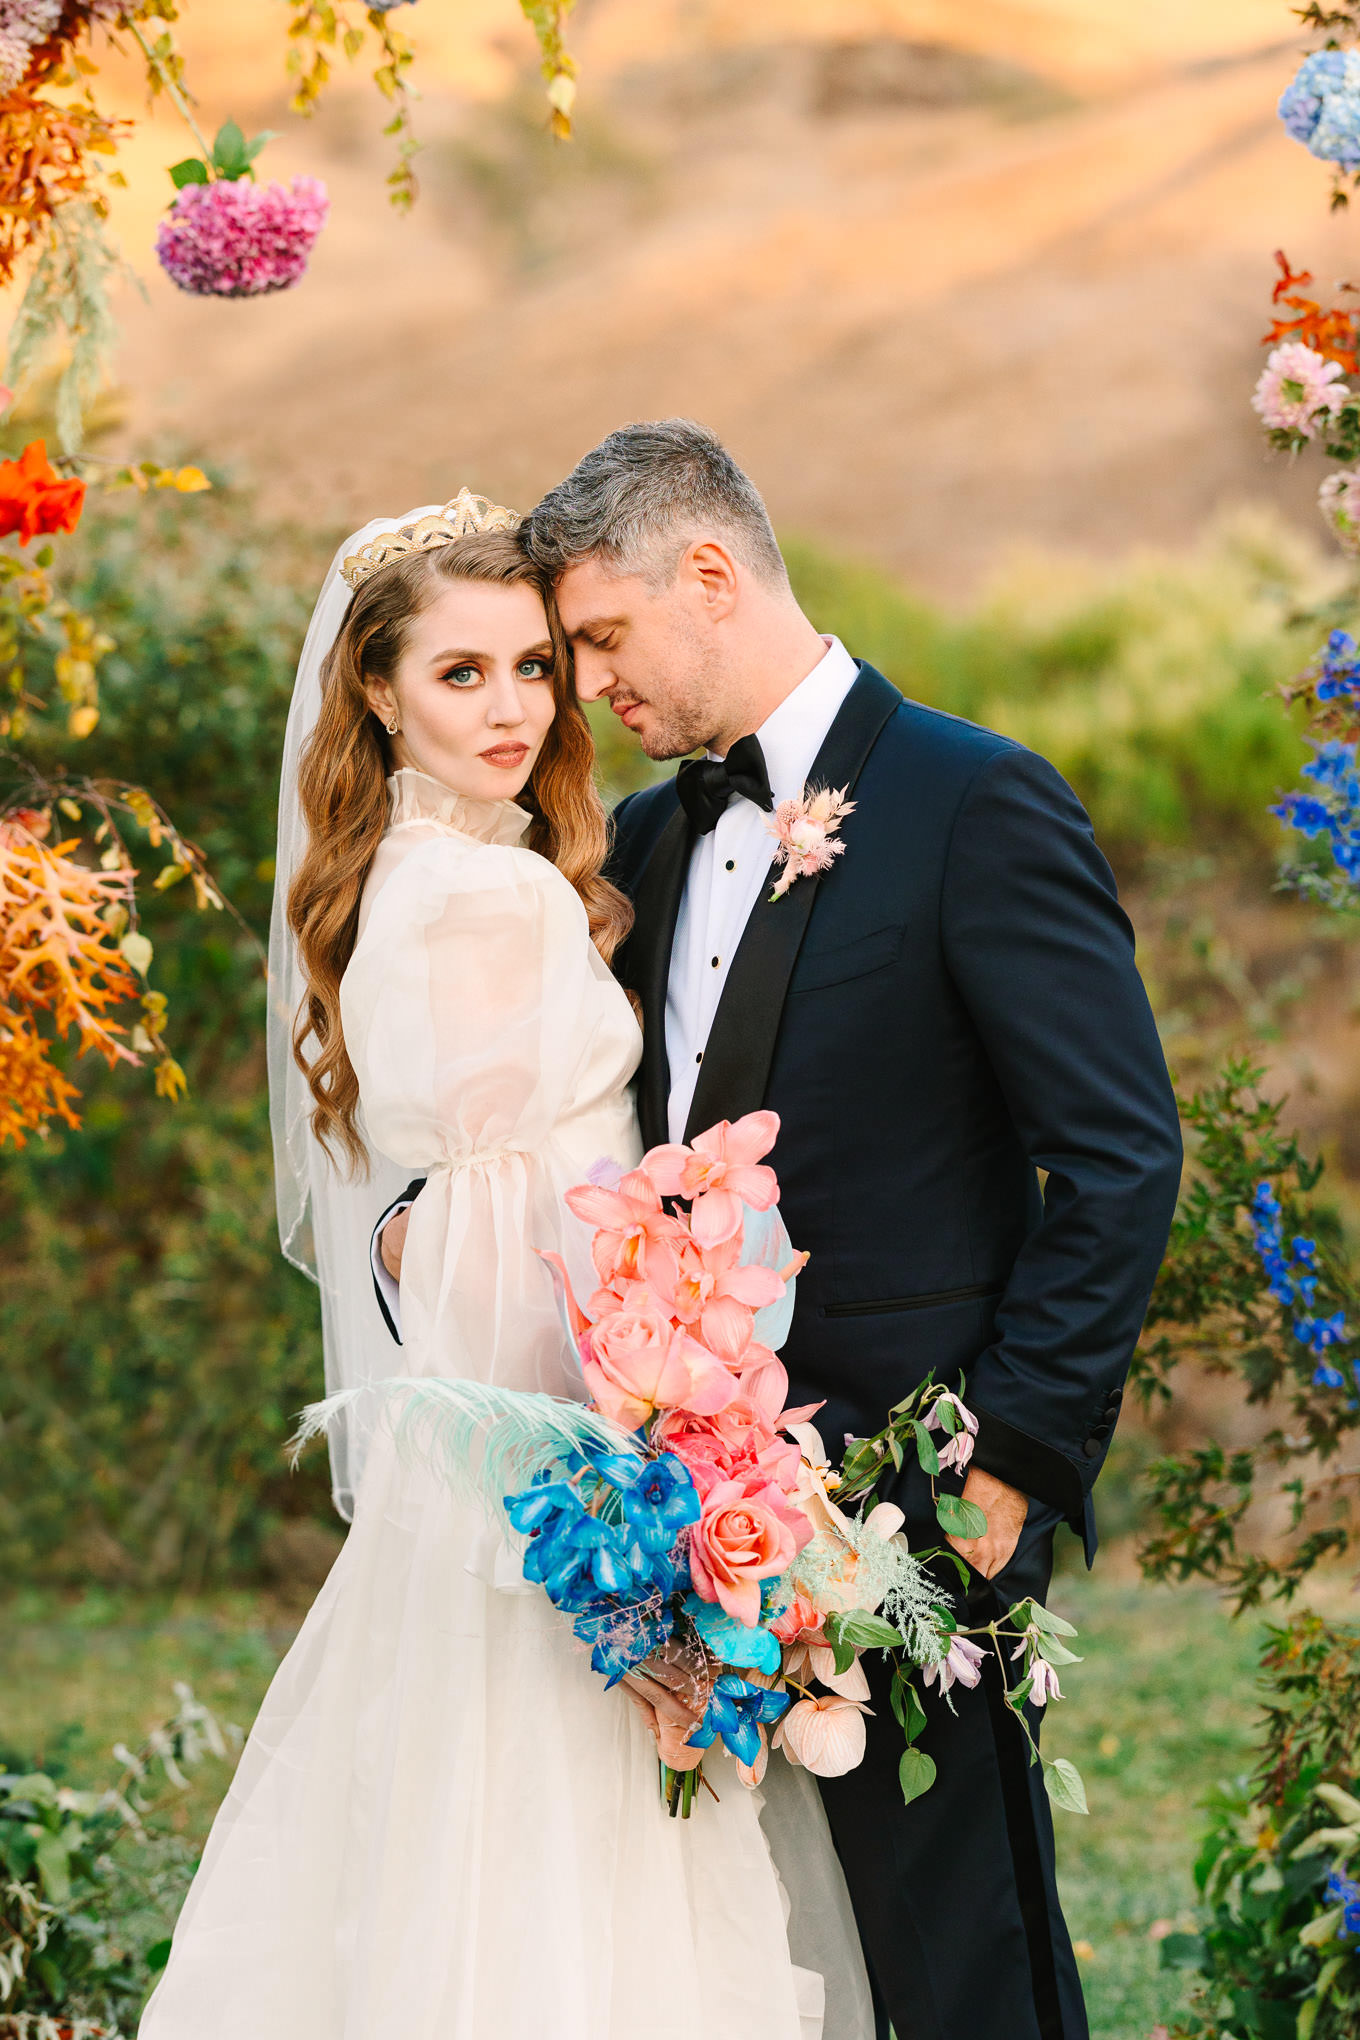 Allison Harvard & Jeremy Burke portraits at floral wedding ceremony installation | Colorful and quirky wedding at Higuera Ranch in San Luis Obispo | #sanluisobispowedding #californiawedding #higueraranch #madonnainn   

Source: Mary Costa Photography | Los Angeles